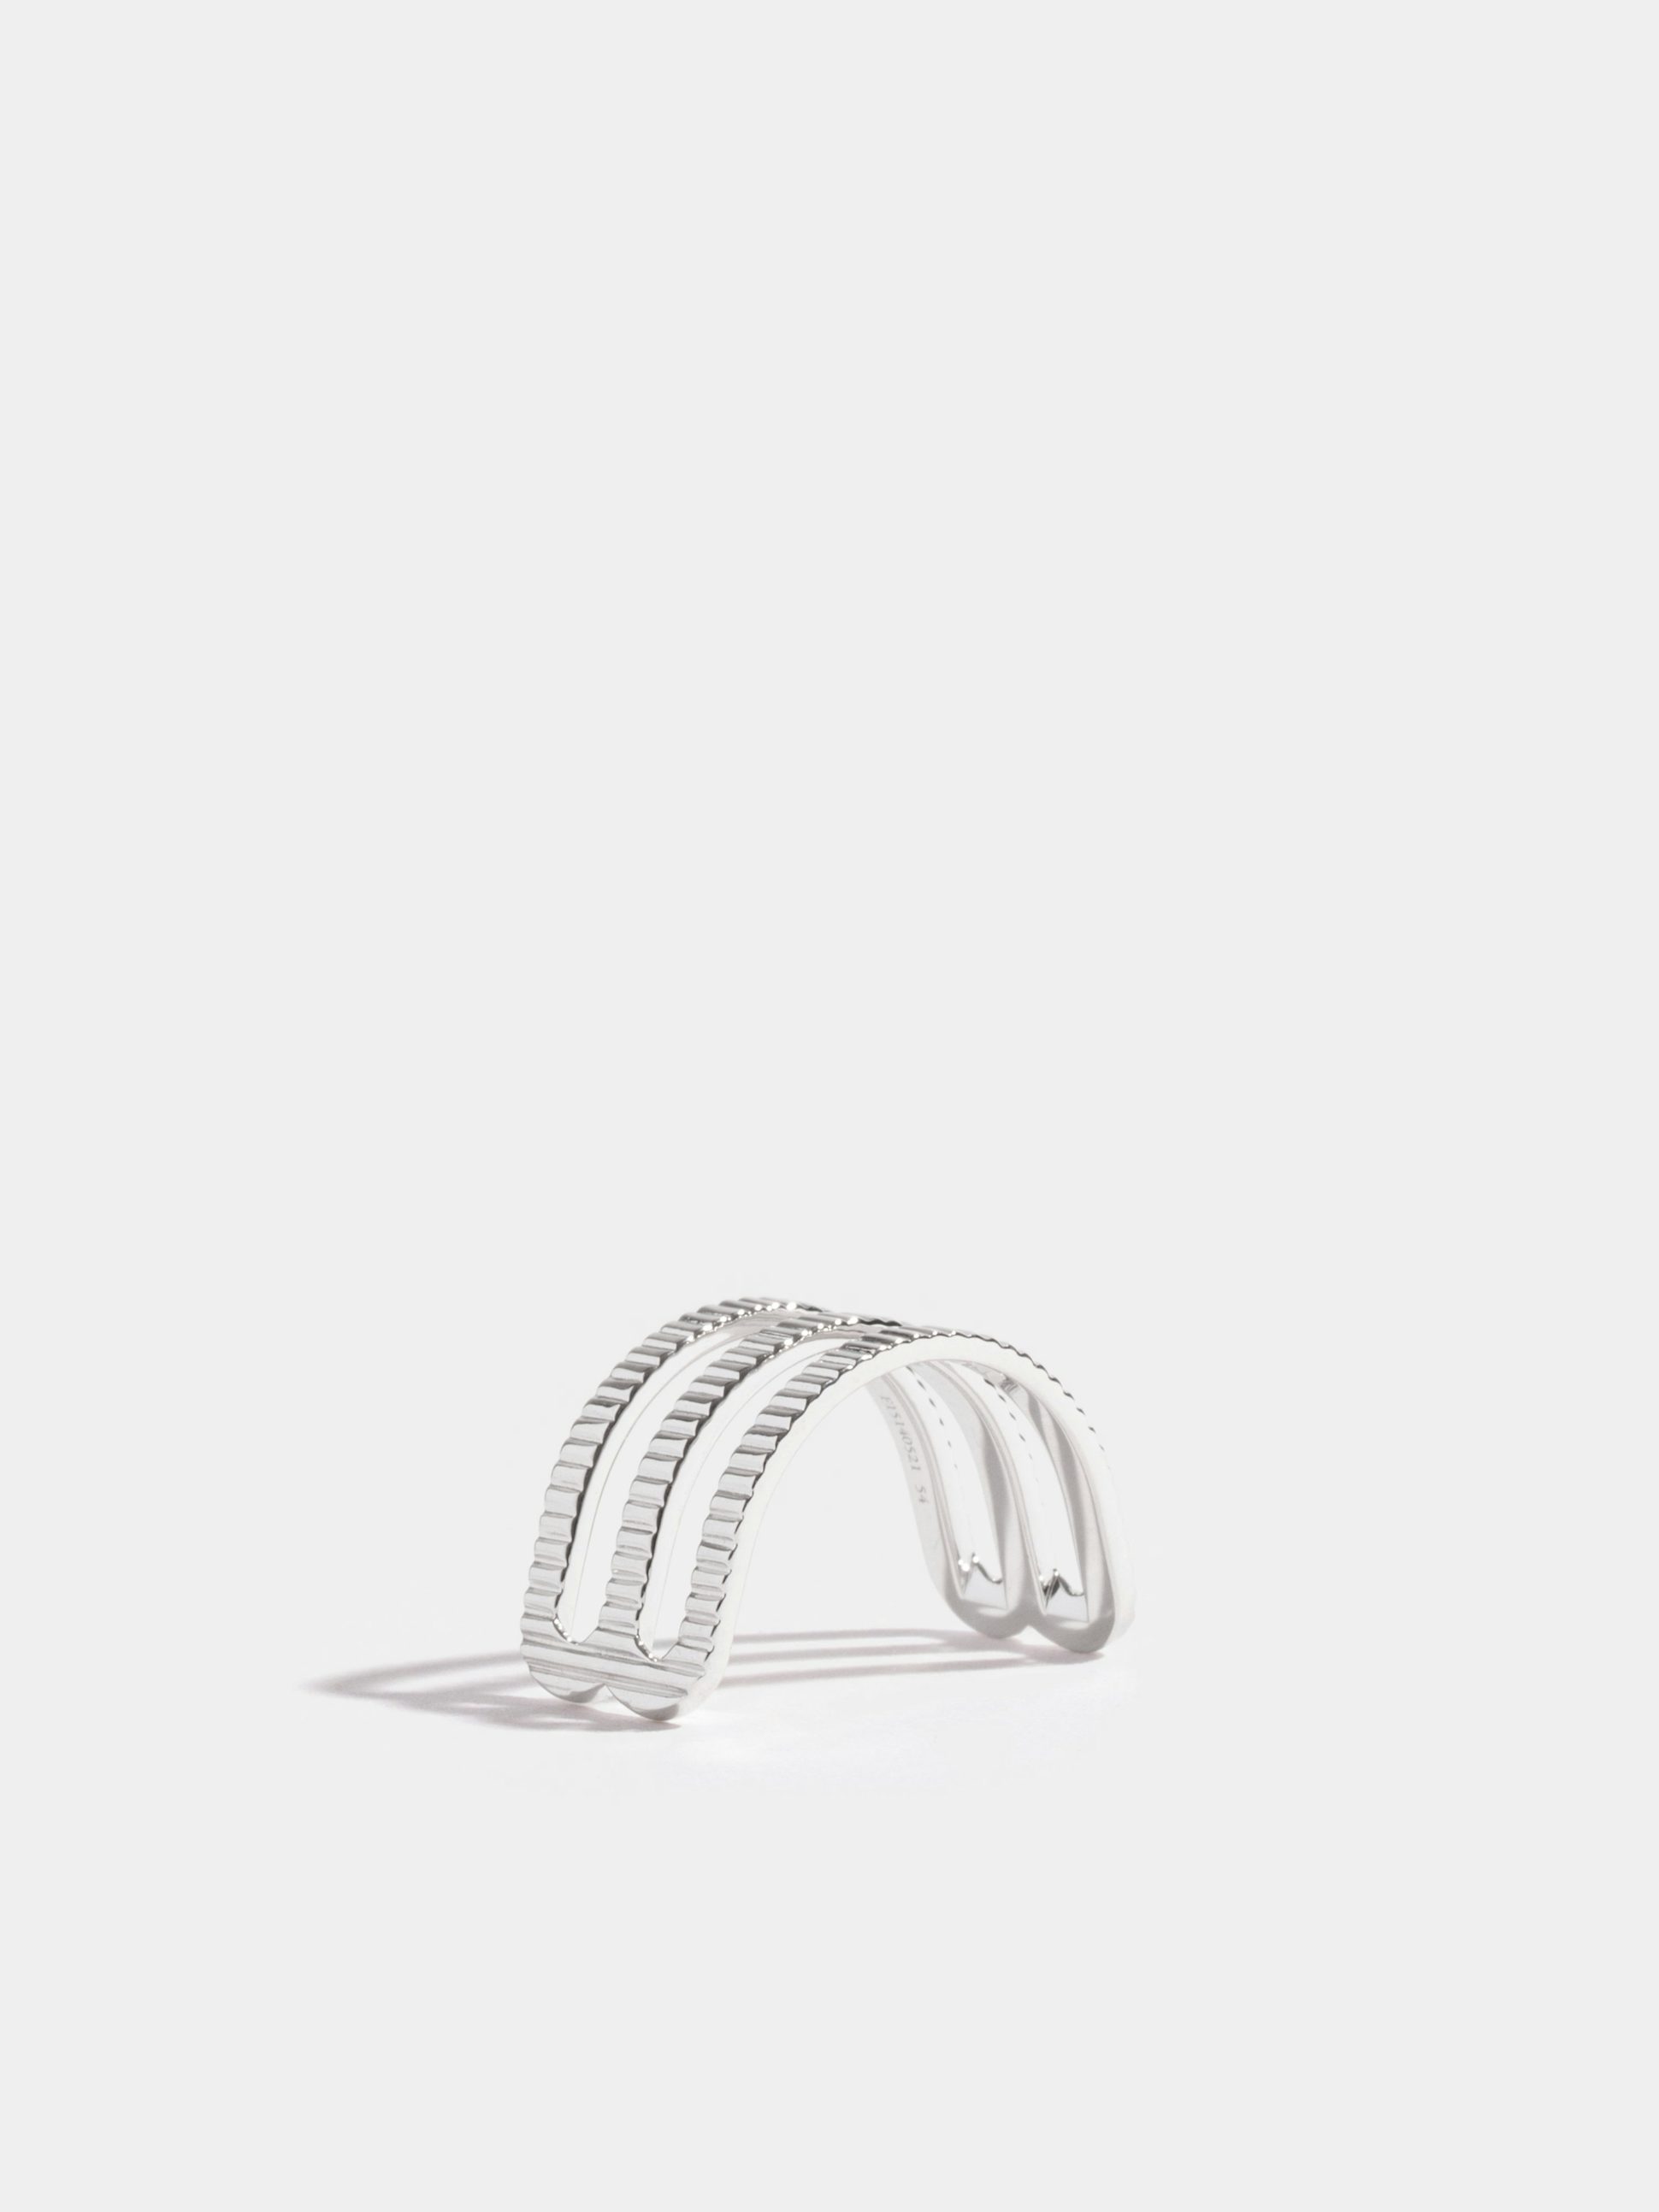 Étreintes double half-ring in 18k Fairmined ethical white gold, with ridges finish.